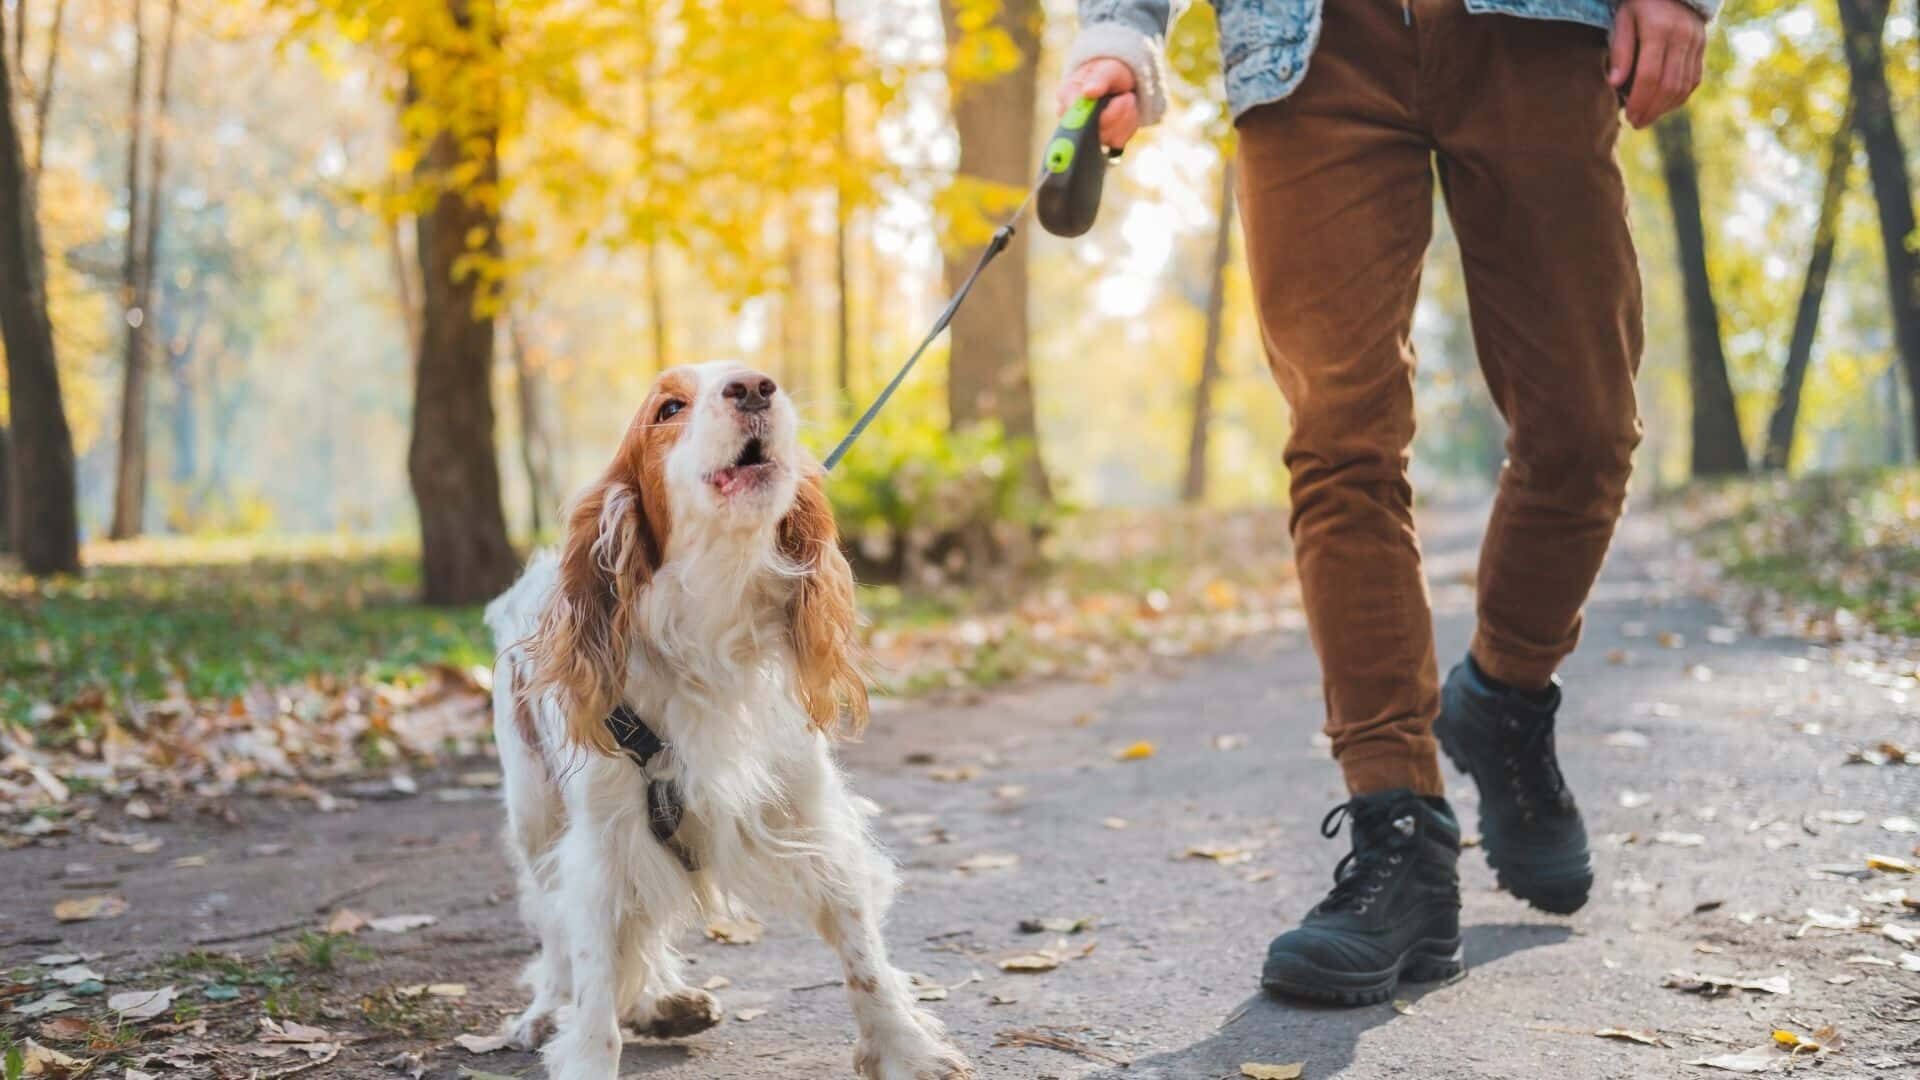 How to train a dog to be on a leash?